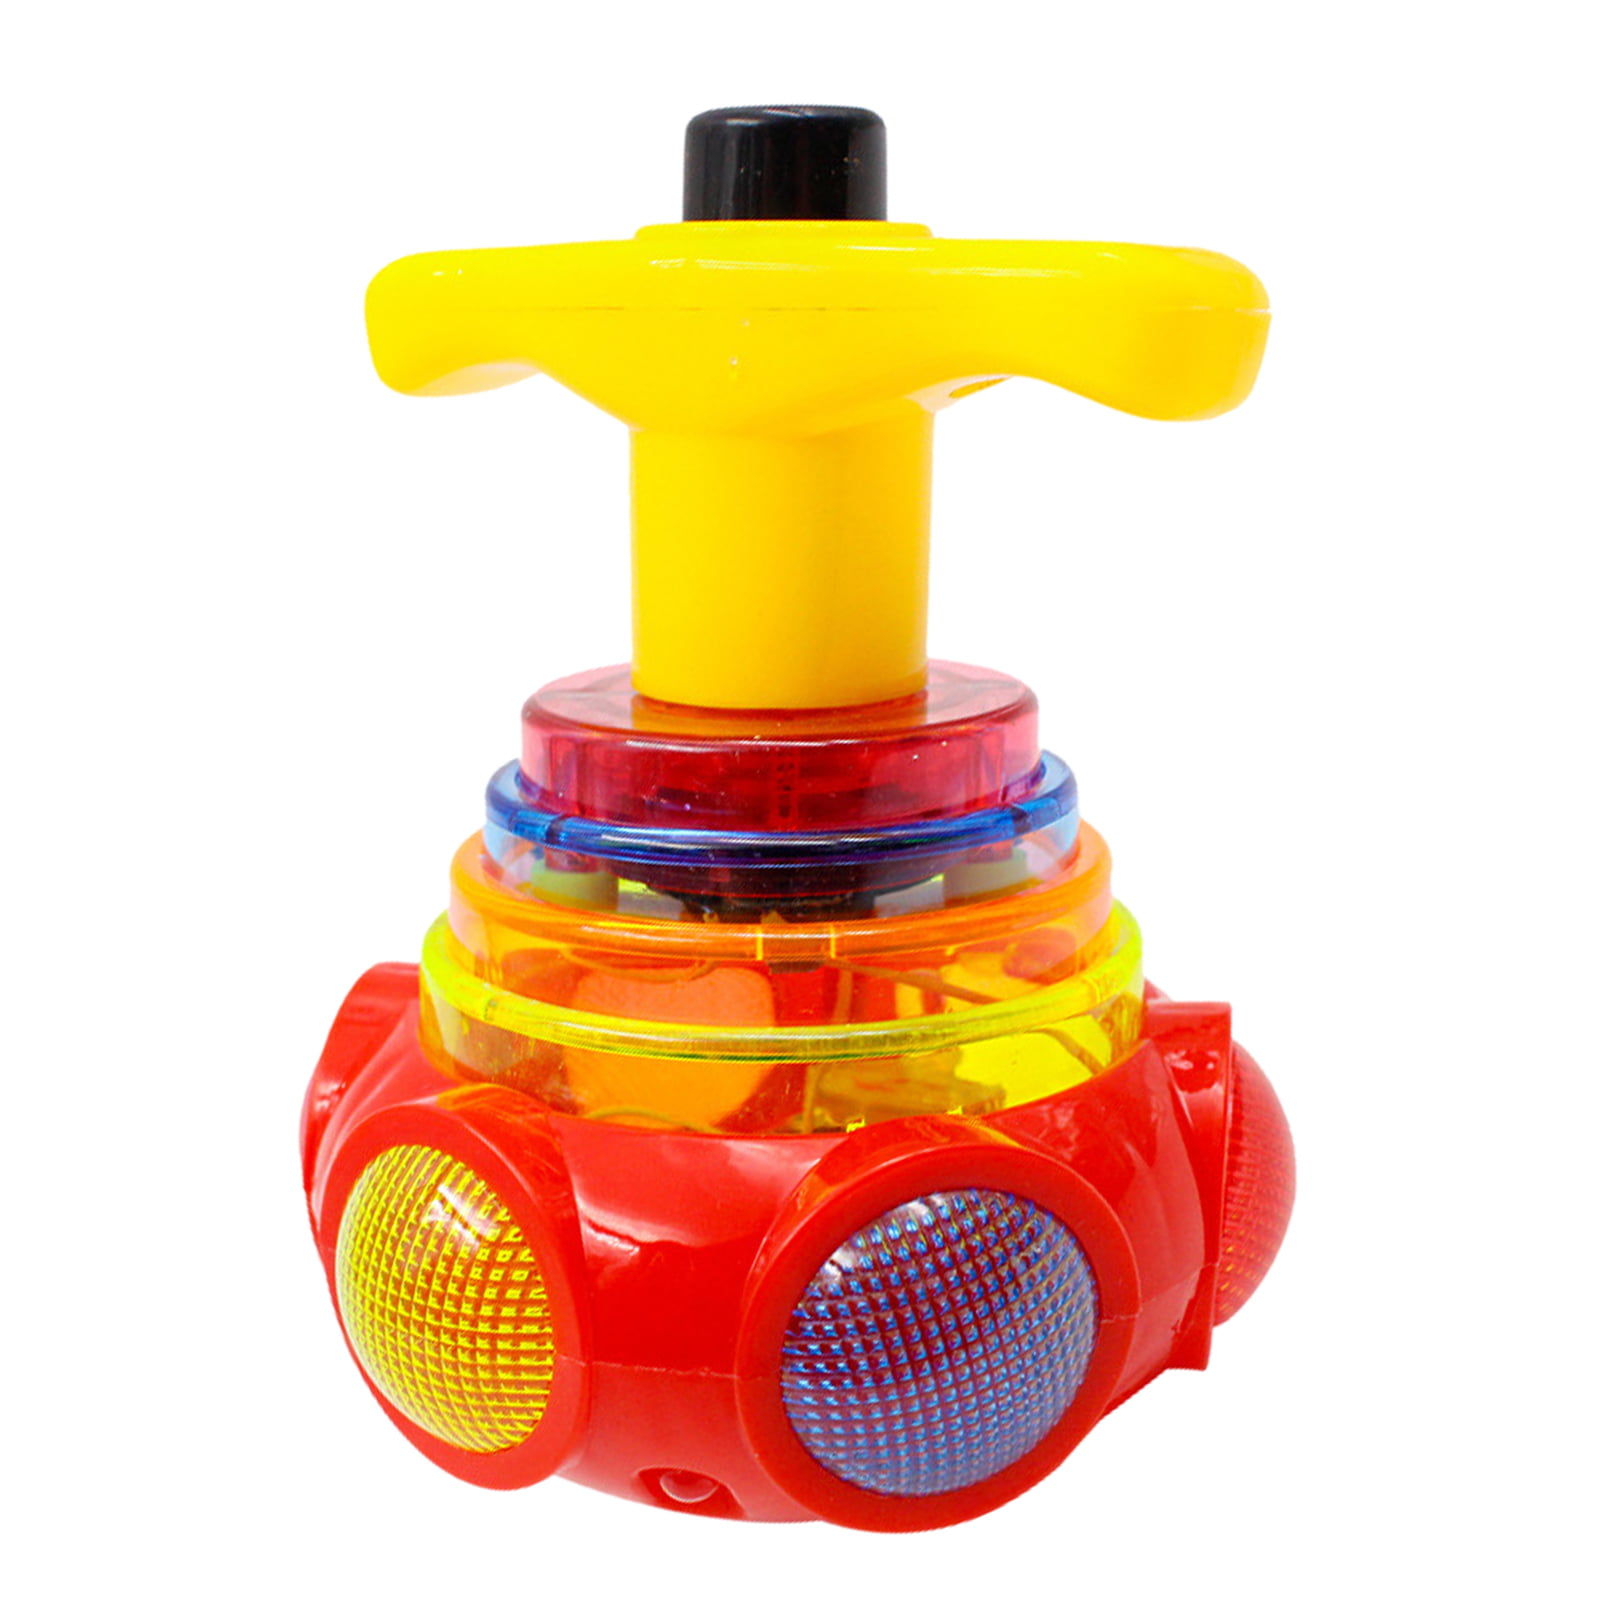 Xmas Spinning Top Toy w/ Music Rotating Top Toy Light Up Spinner LED for Kids 